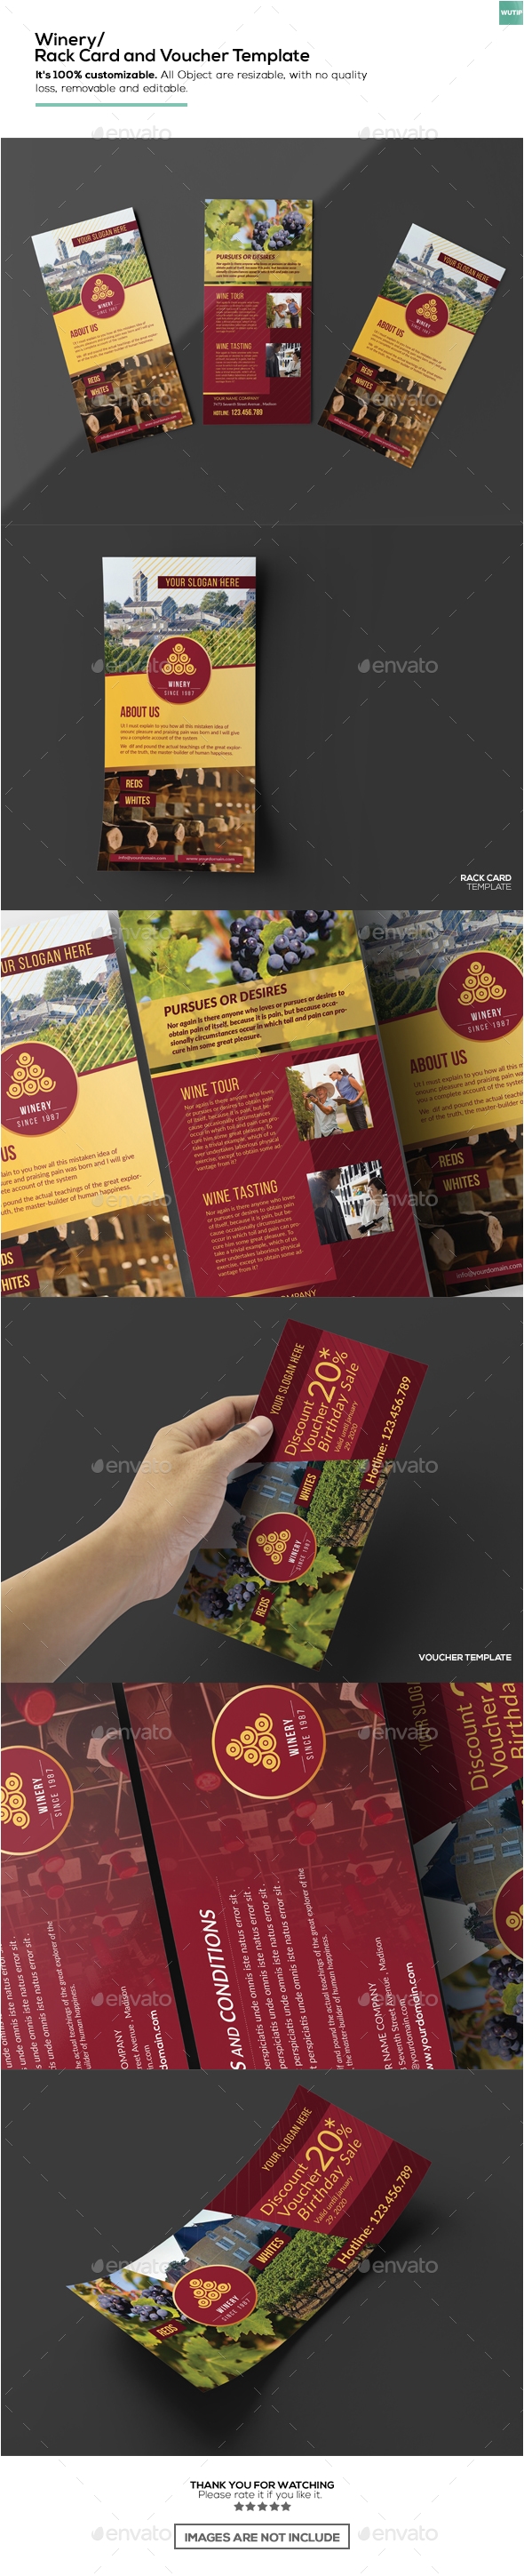 winery rack card and voucher template photoshop psd elegant free available